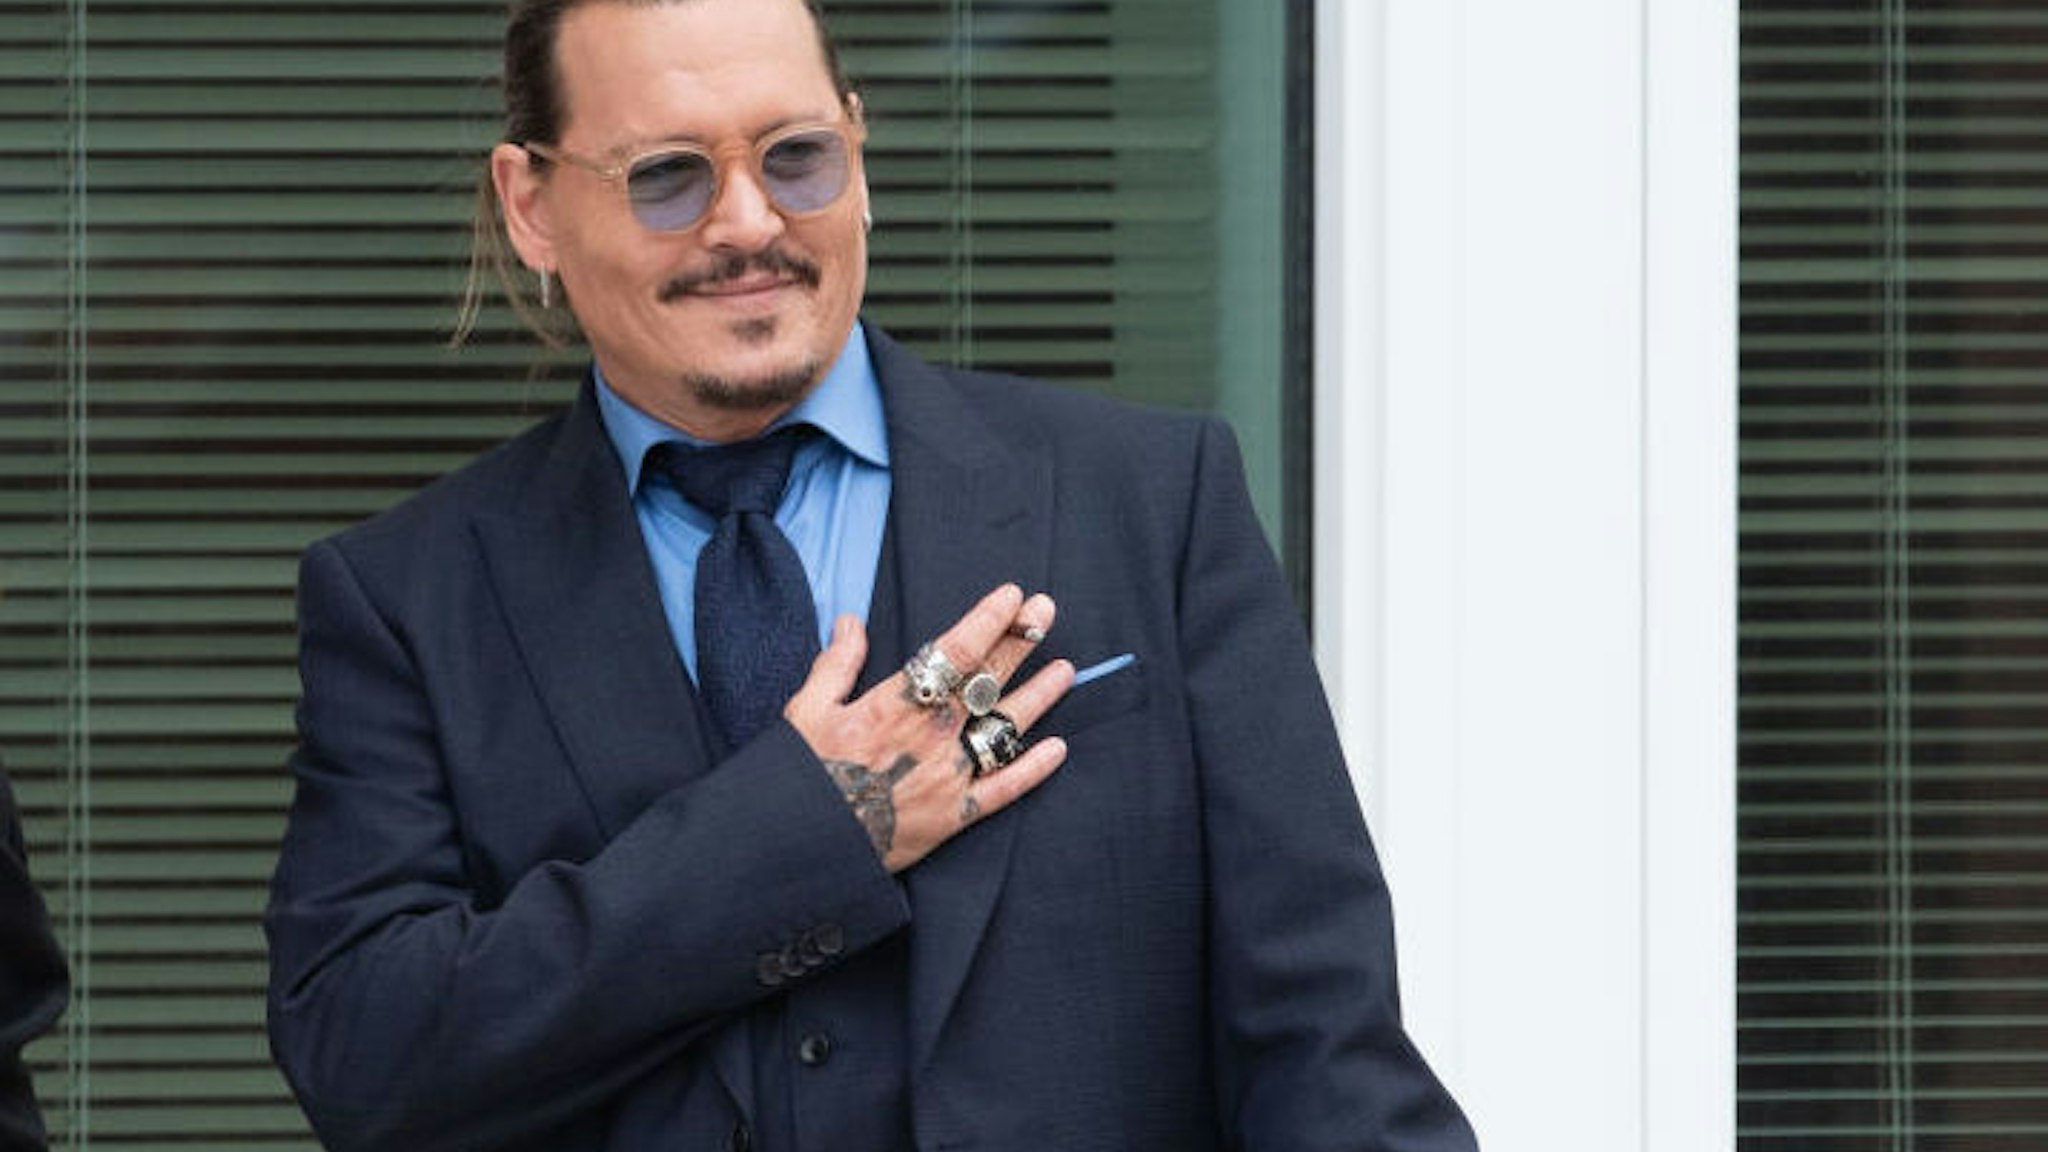 Johnny Depp gestures to fans during a recess outside court during the Johnny Depp and Amber Heard civil trial at Fairfax County Circuit Court on May 27, 2022 in Fairfax, Virginia.